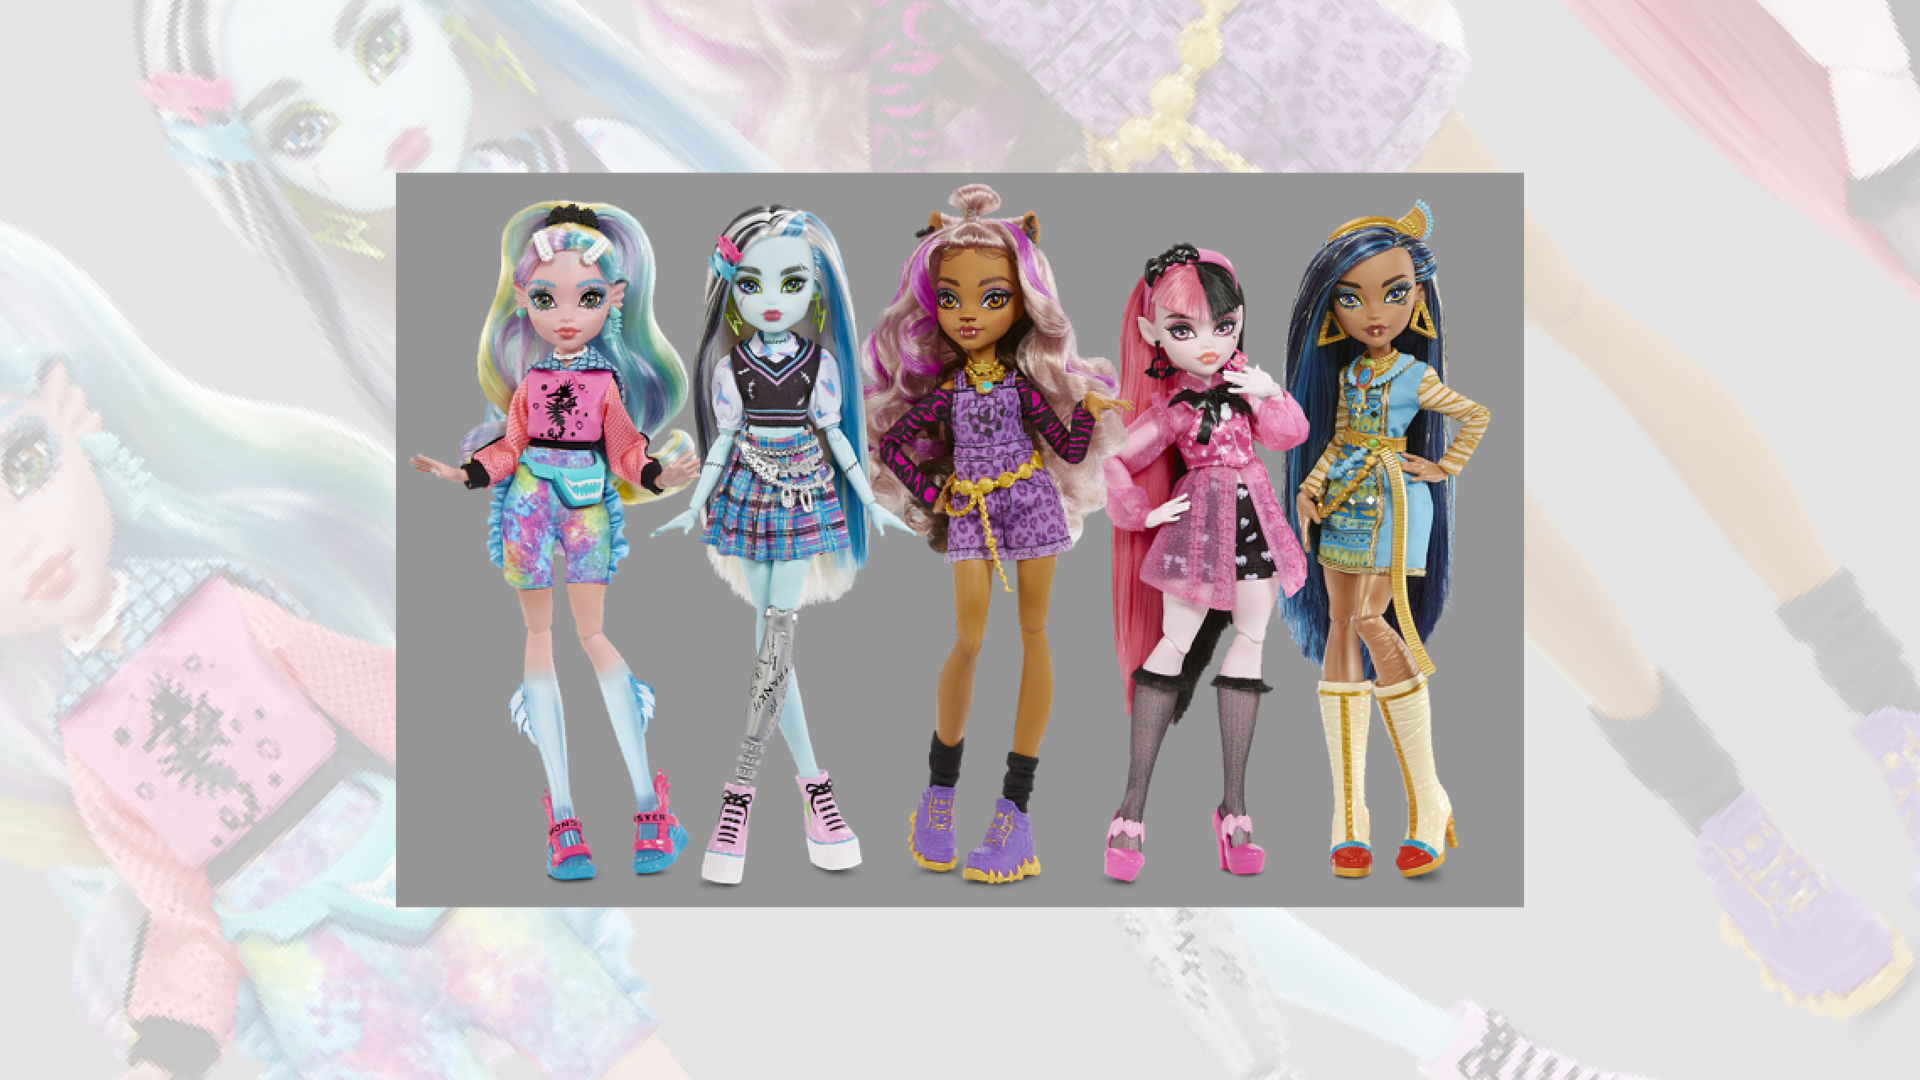 Bek Hymne Roeispaan Monster High Re-Fuels, Barbie and Polly Pocket Come to Roblox | License  Global